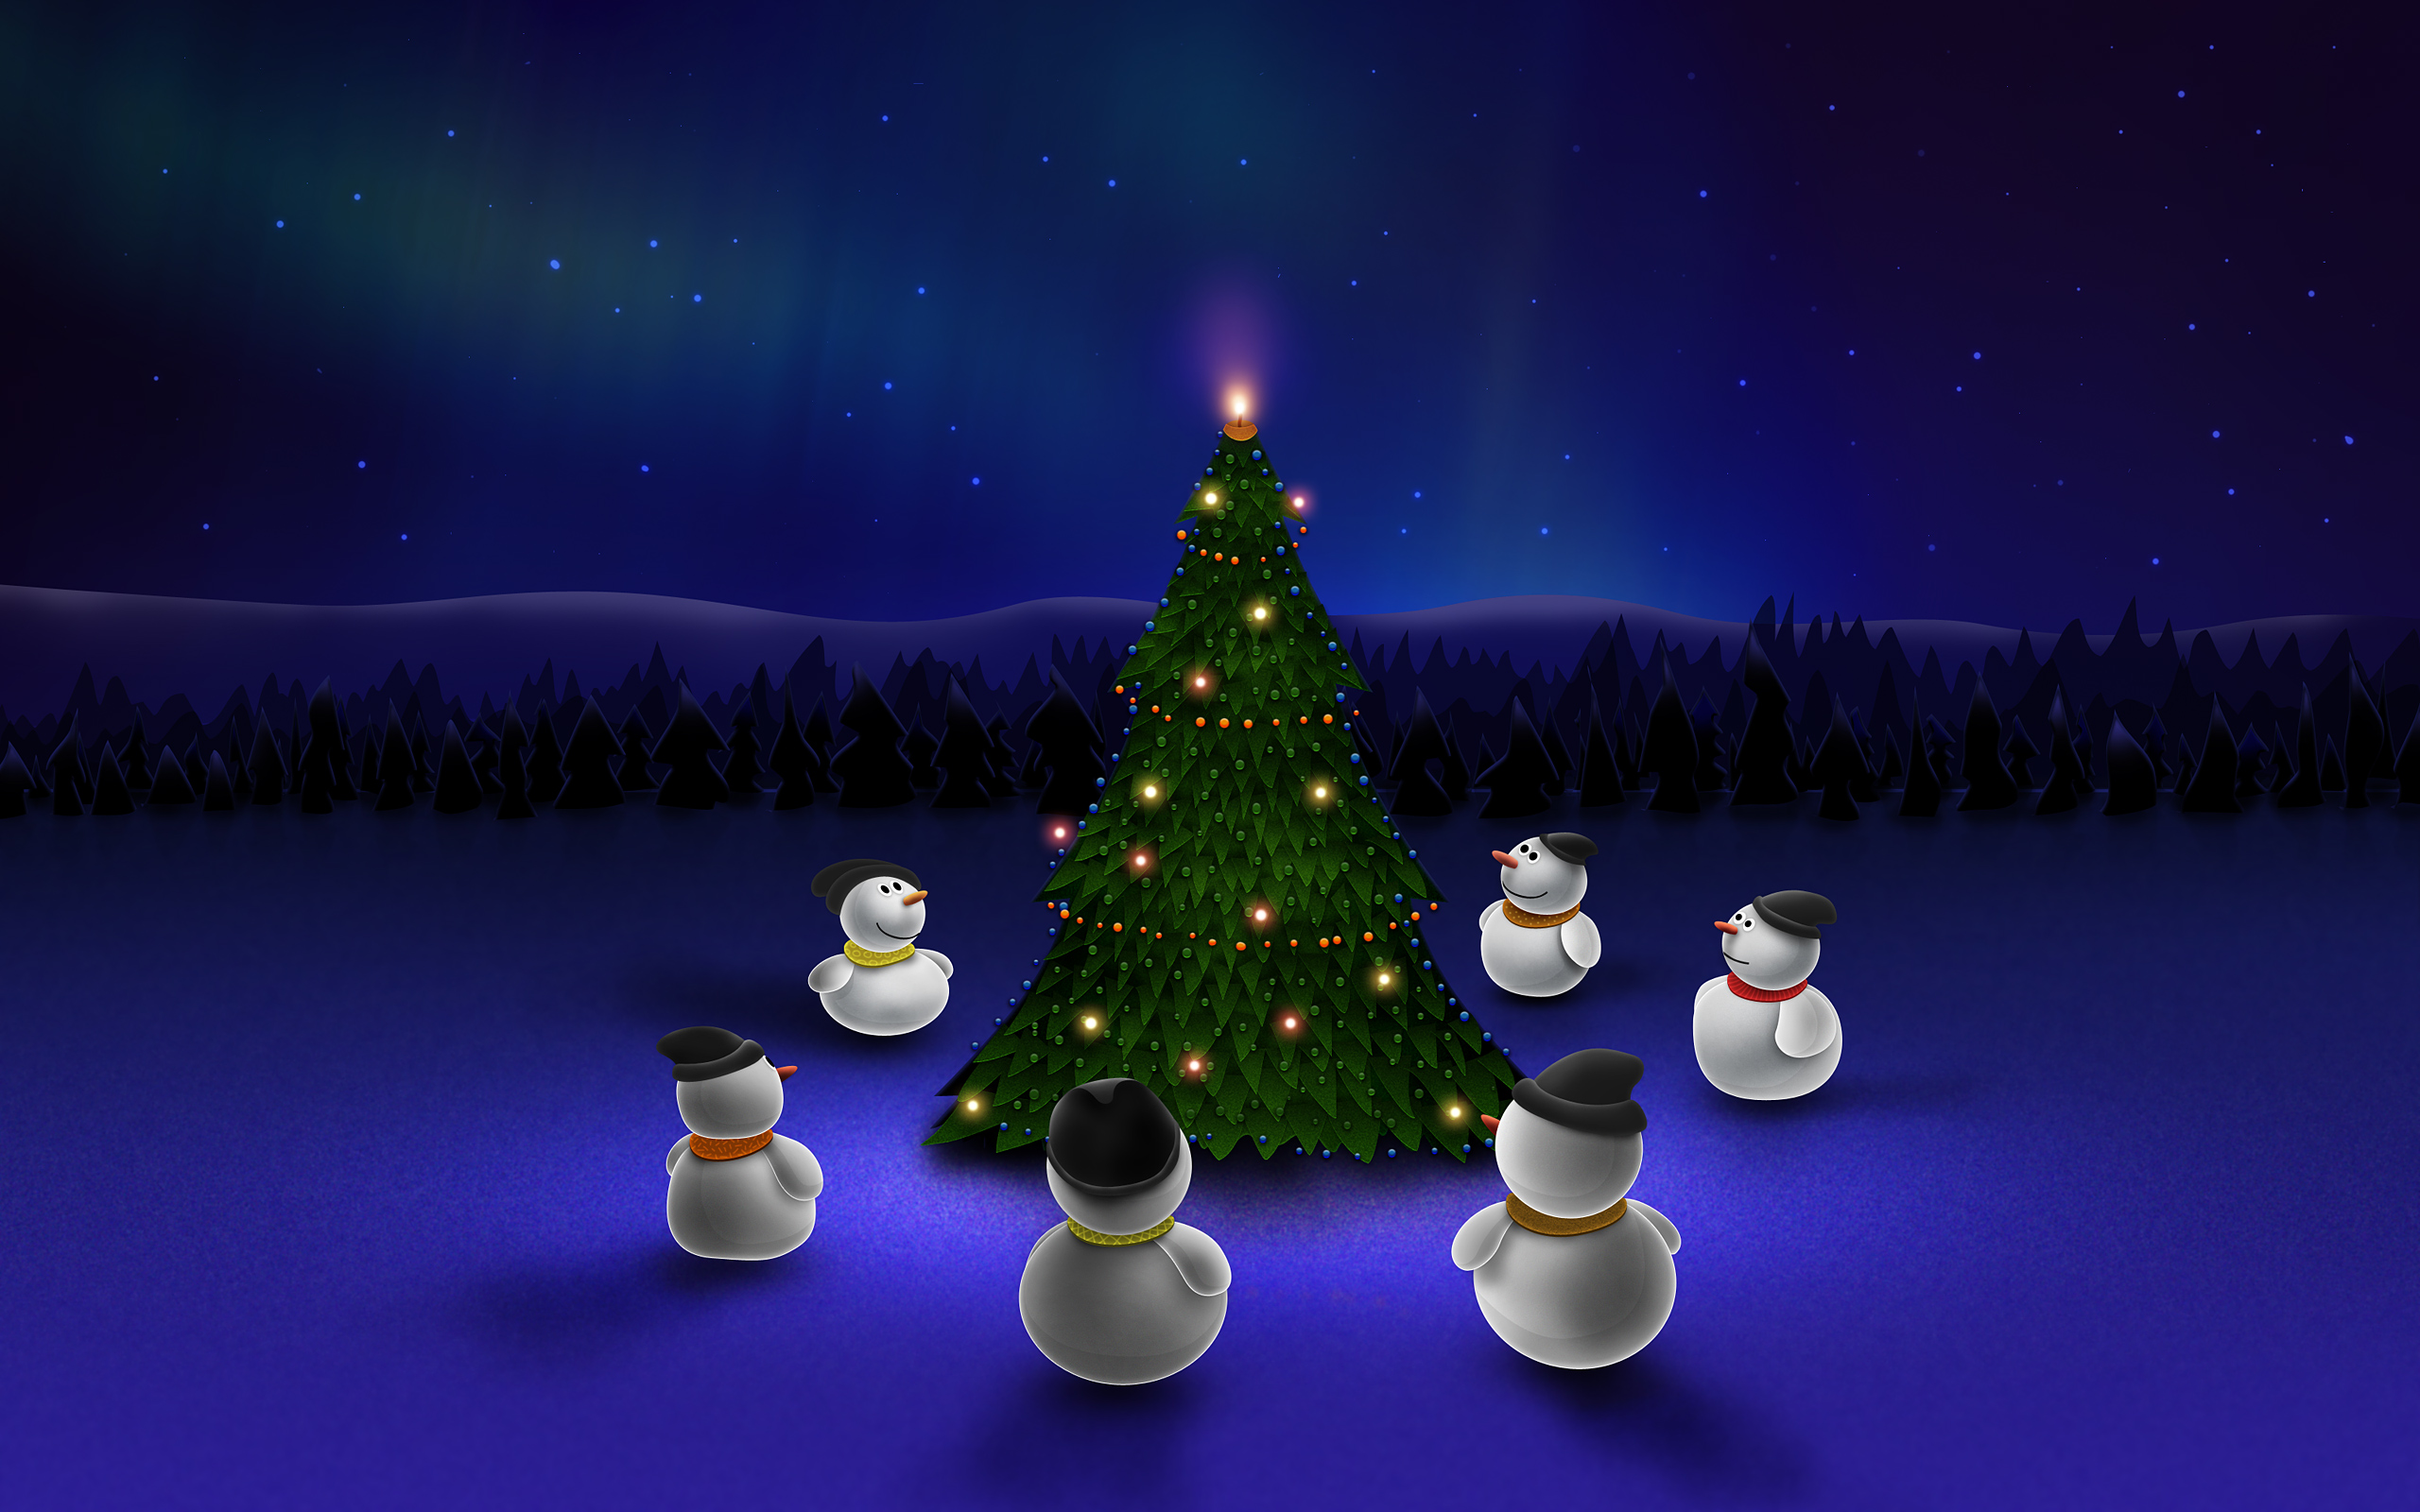 Merry Christmas 2021 HD Wallpapers For Desktop Background